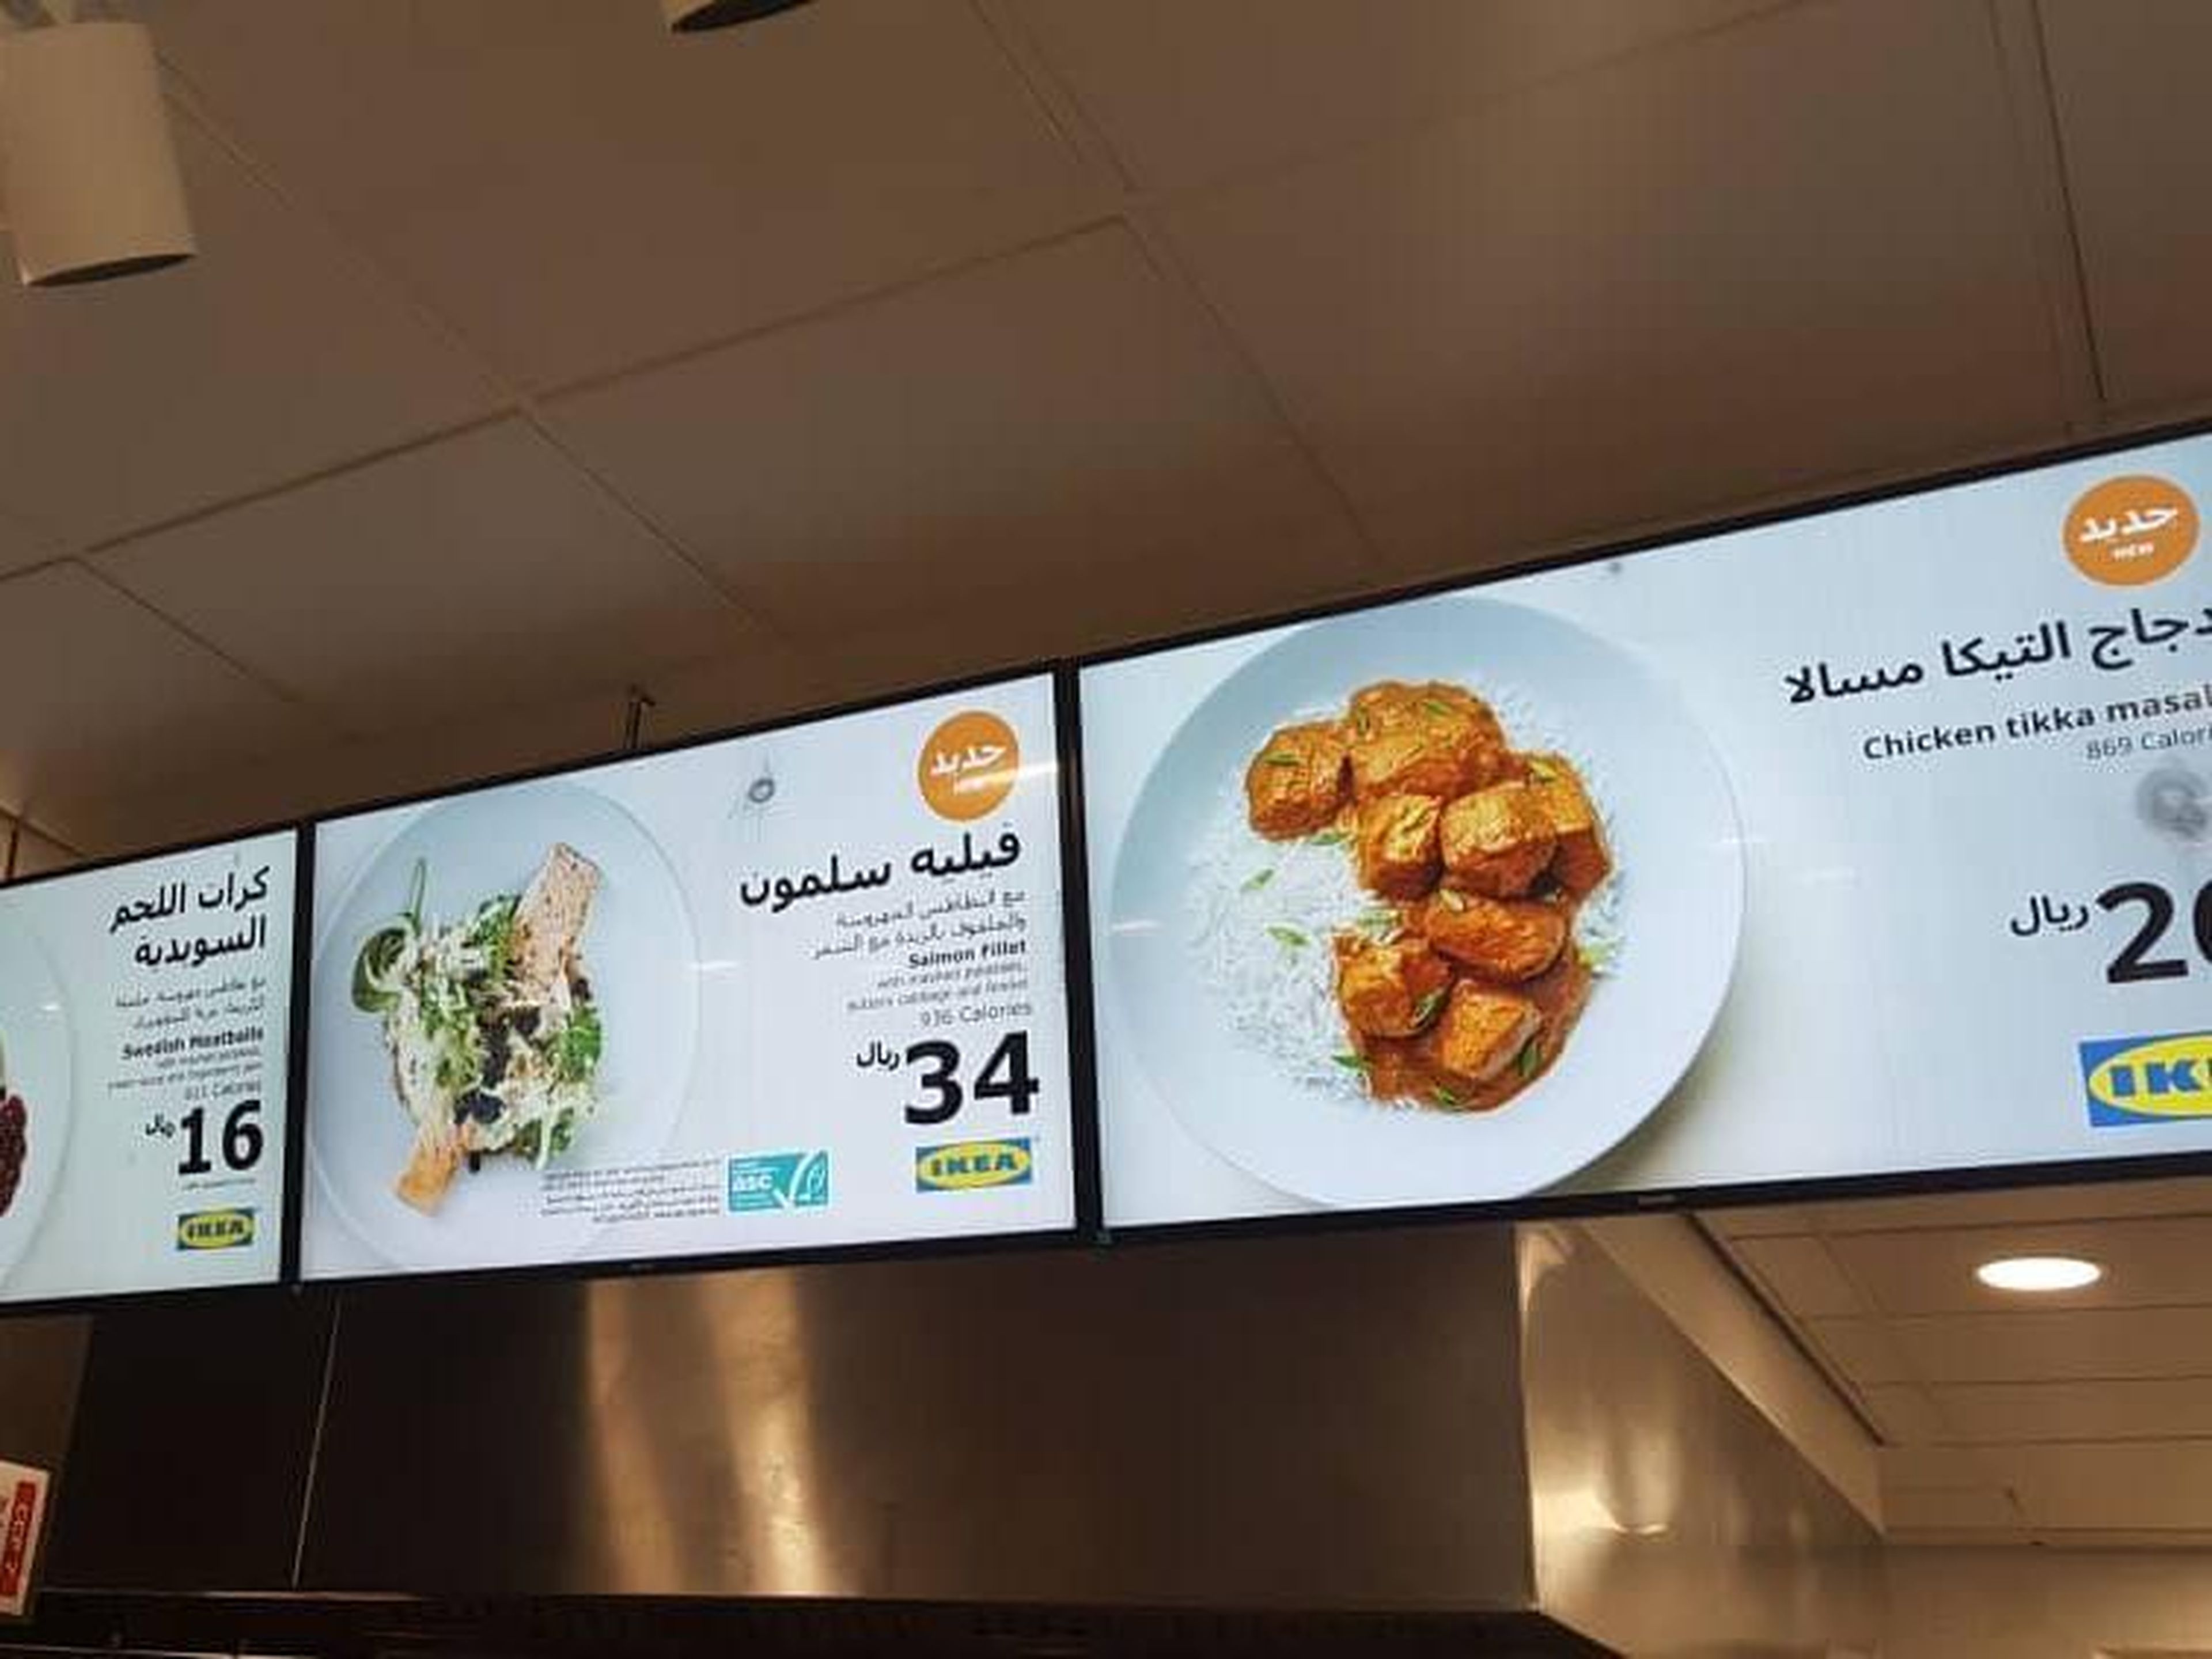 Saudi Arabia's IKEA menu in Jeddah features a bunch of different Middle Eastern dining options. From chicken tikka masala ...